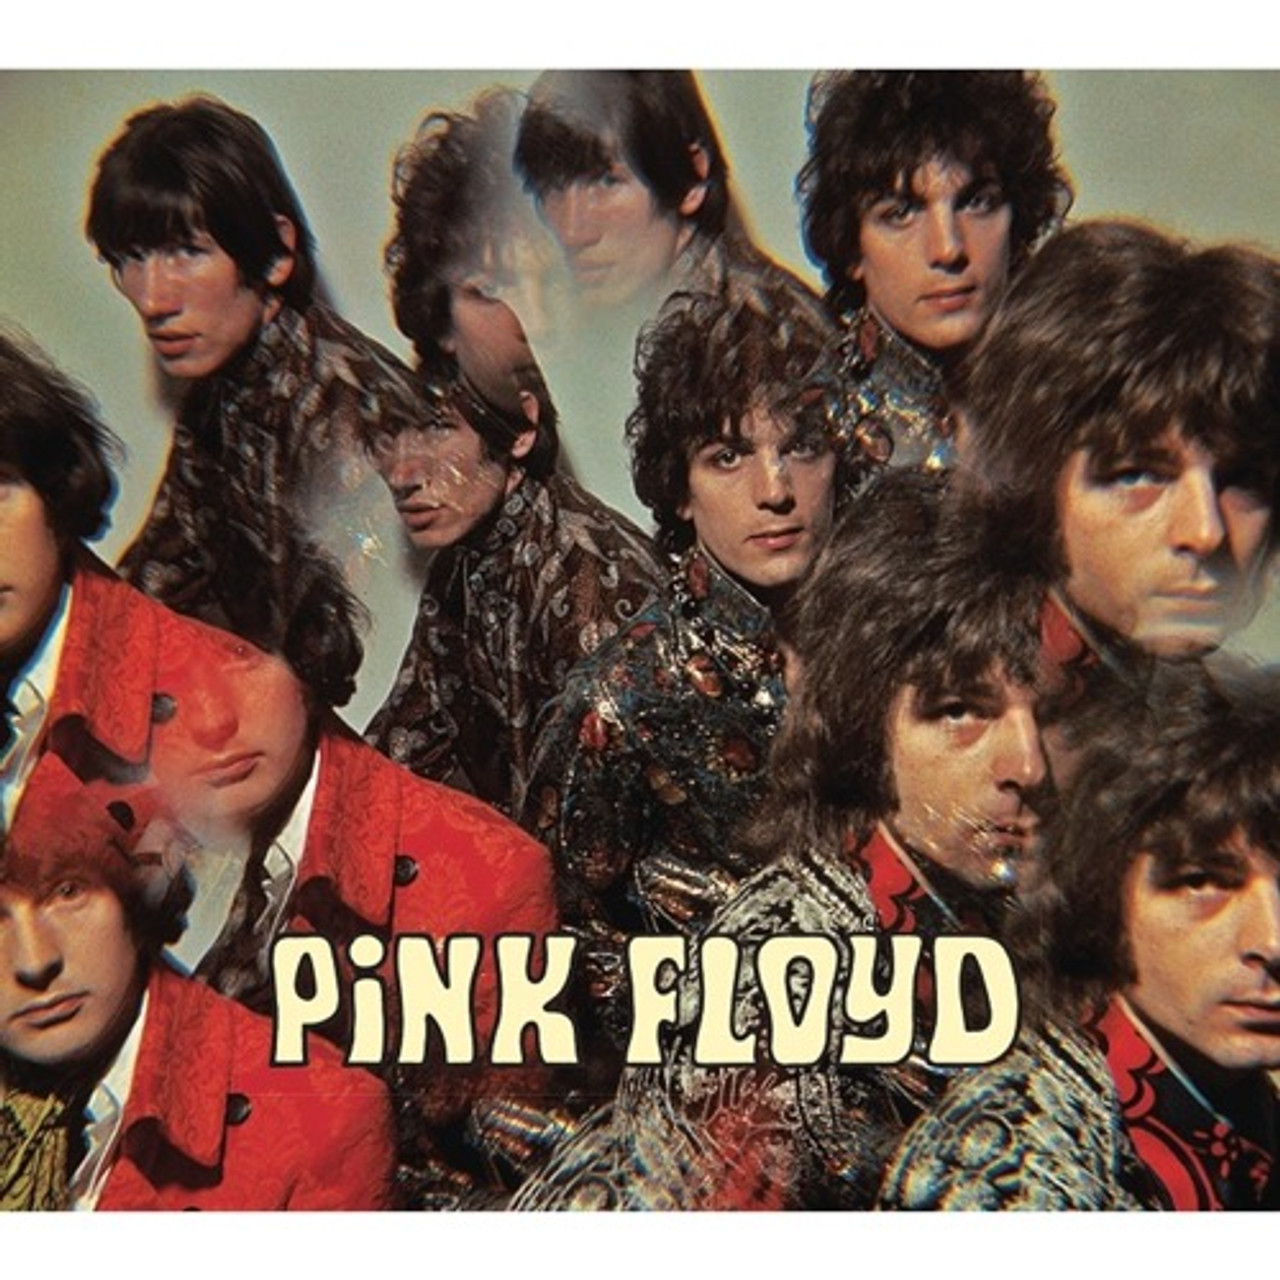 Pink Floyd - The Piper at the Gates of Dawn (180g Vinyl LP) * * * - Direct